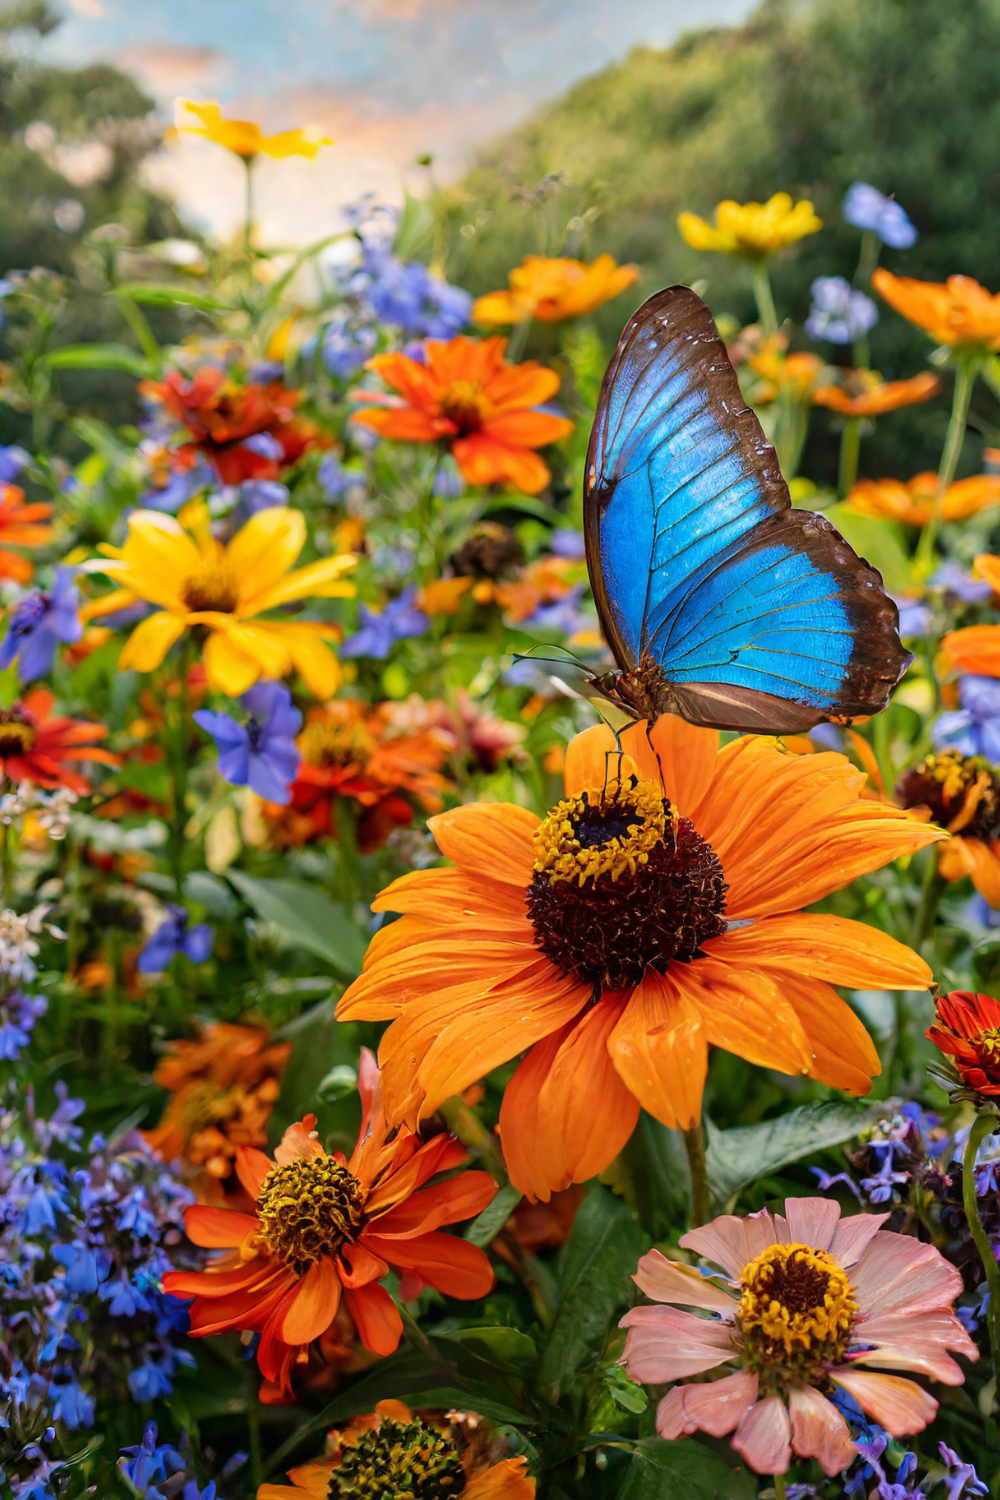 Butterfly and Mexican sunfower flower